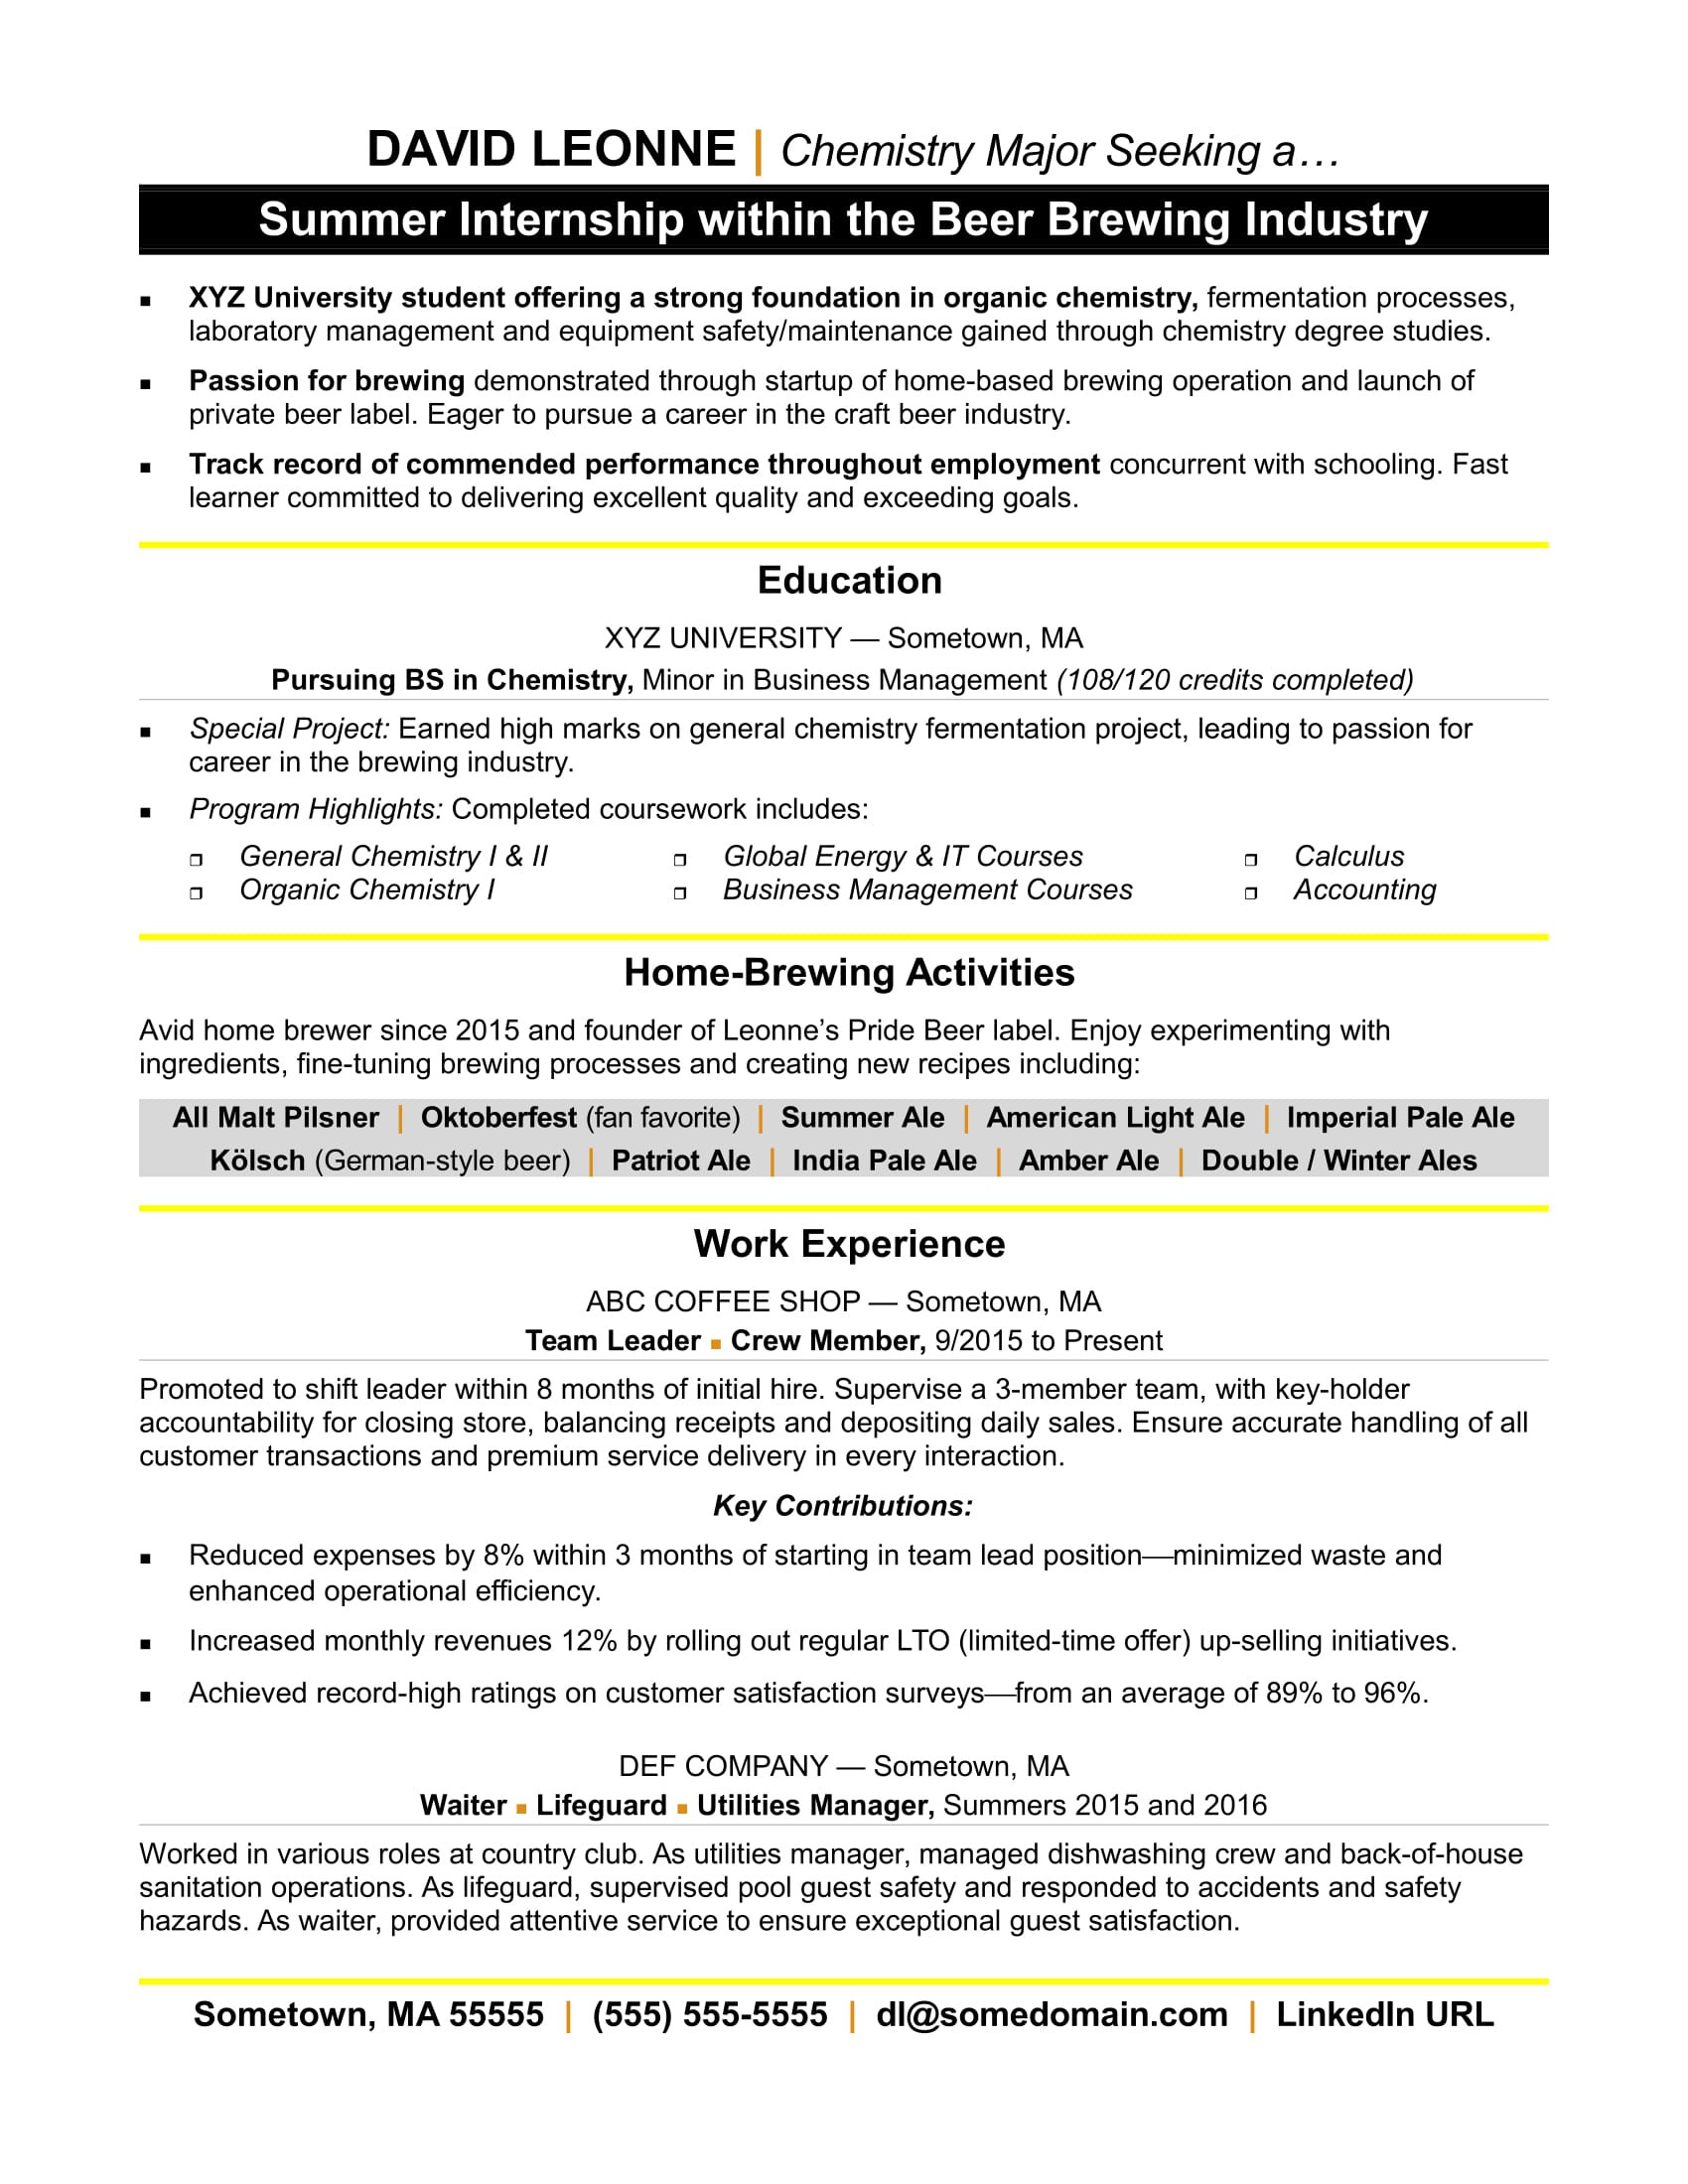 College Student Resume for Internship Template Resume for Internship Monster.com